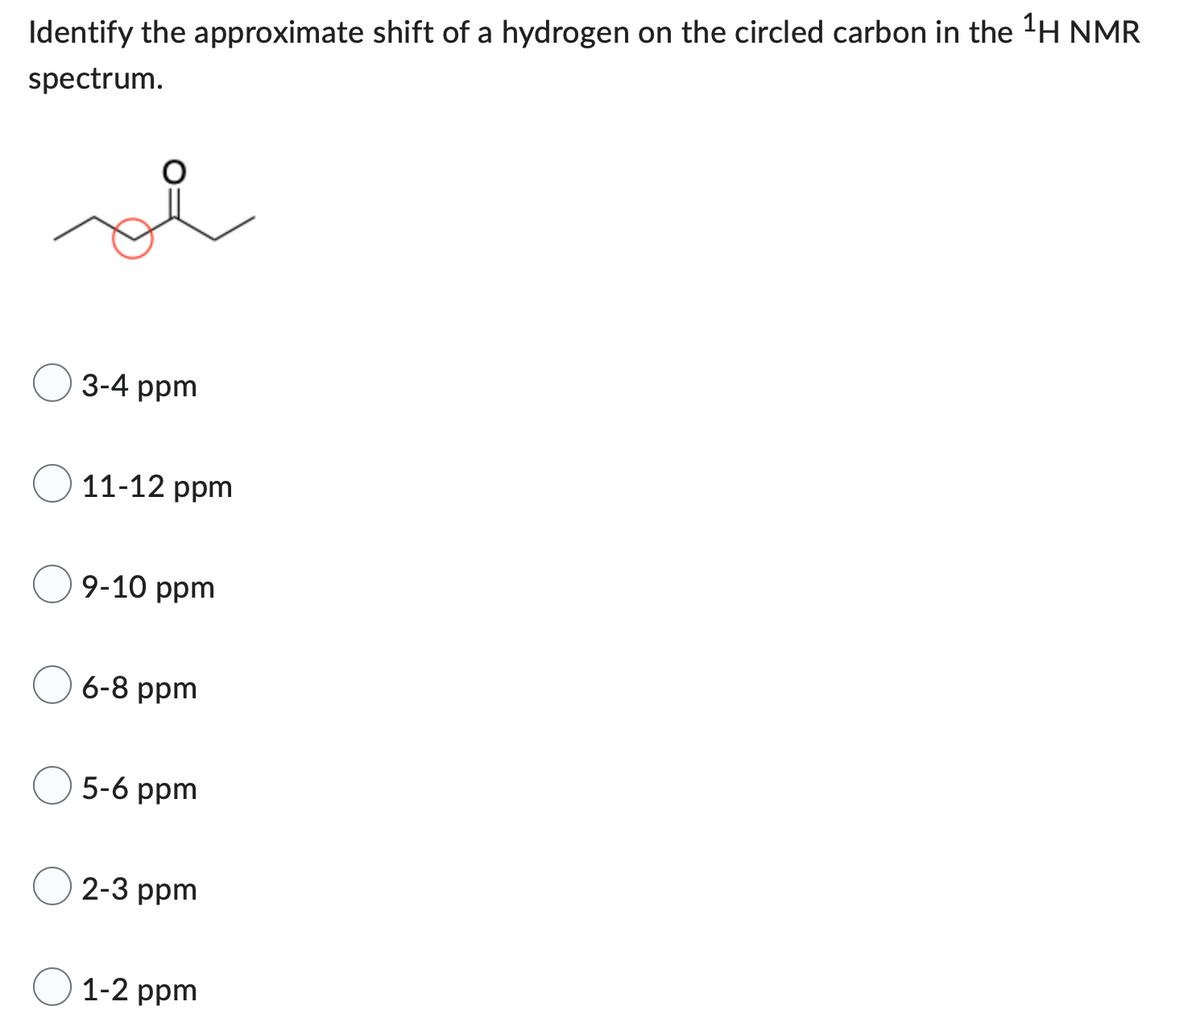 Identify the approximate shift of a hydrogen on the circled carbon in the ¹H NMR
spectrum.
3-4 ppm
11-12 ppm
9-10 ppm
6-8 ppm
5-6 ppm
2-3 ppm
1-2 ppm